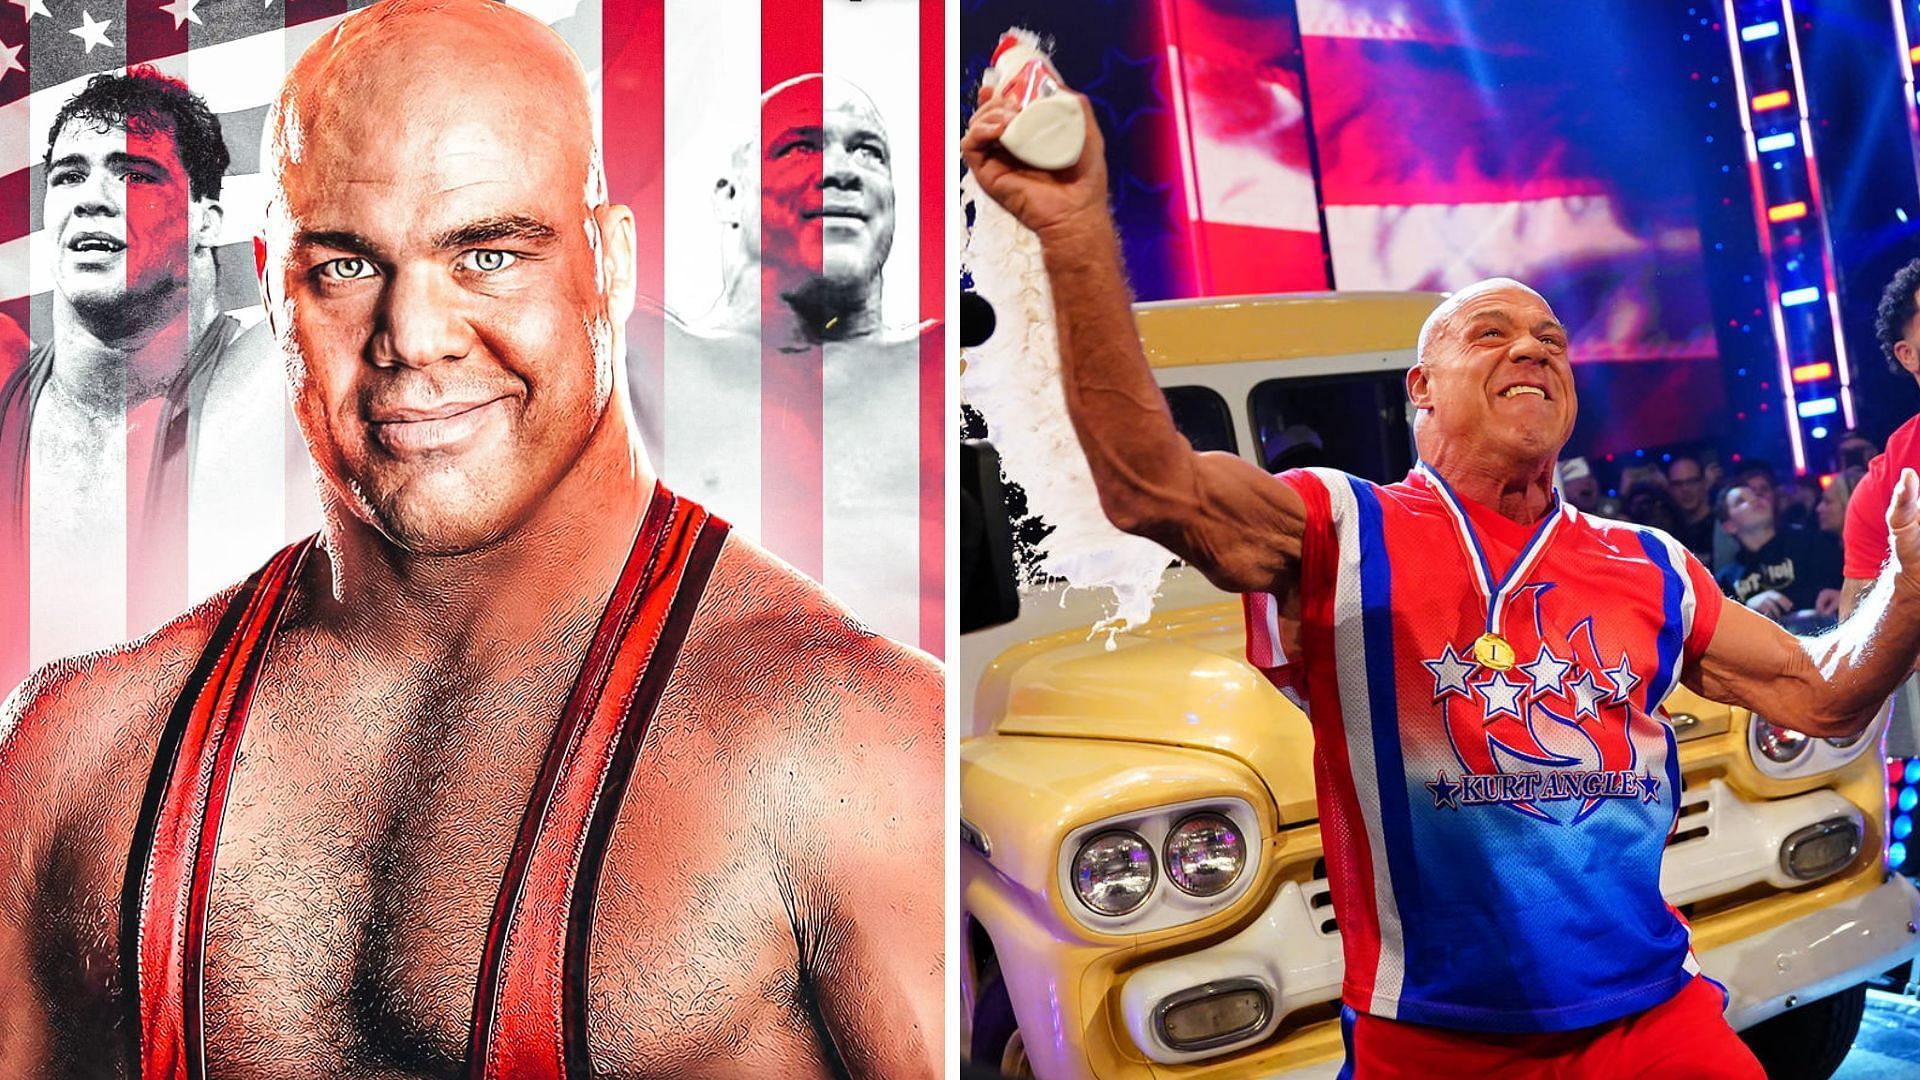 Kurt Angle recently returned to celebrate his birthday in WWE